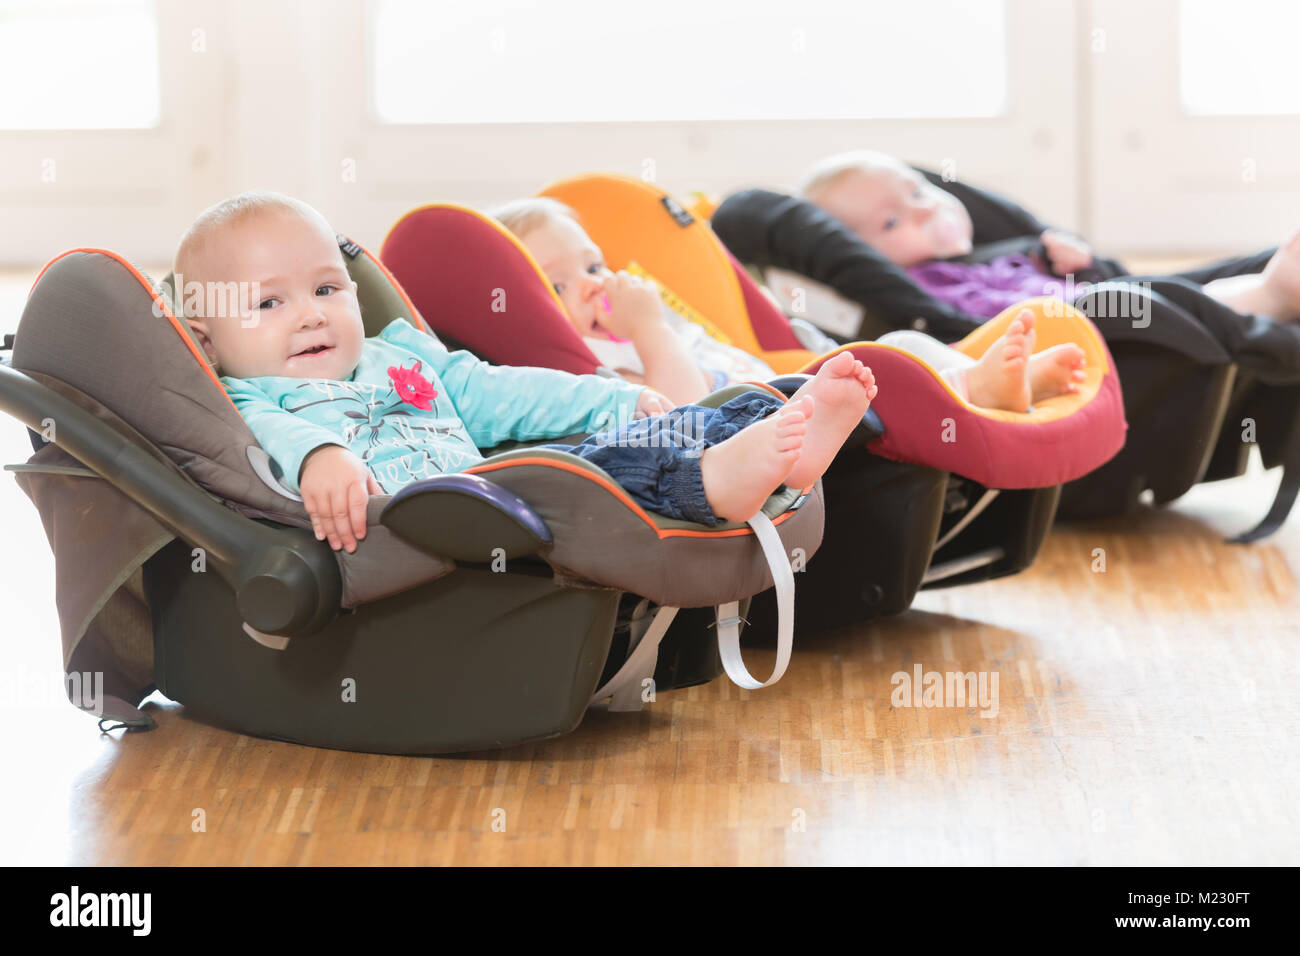 New-born babies in toddler group lying in baby shells Stock Photo